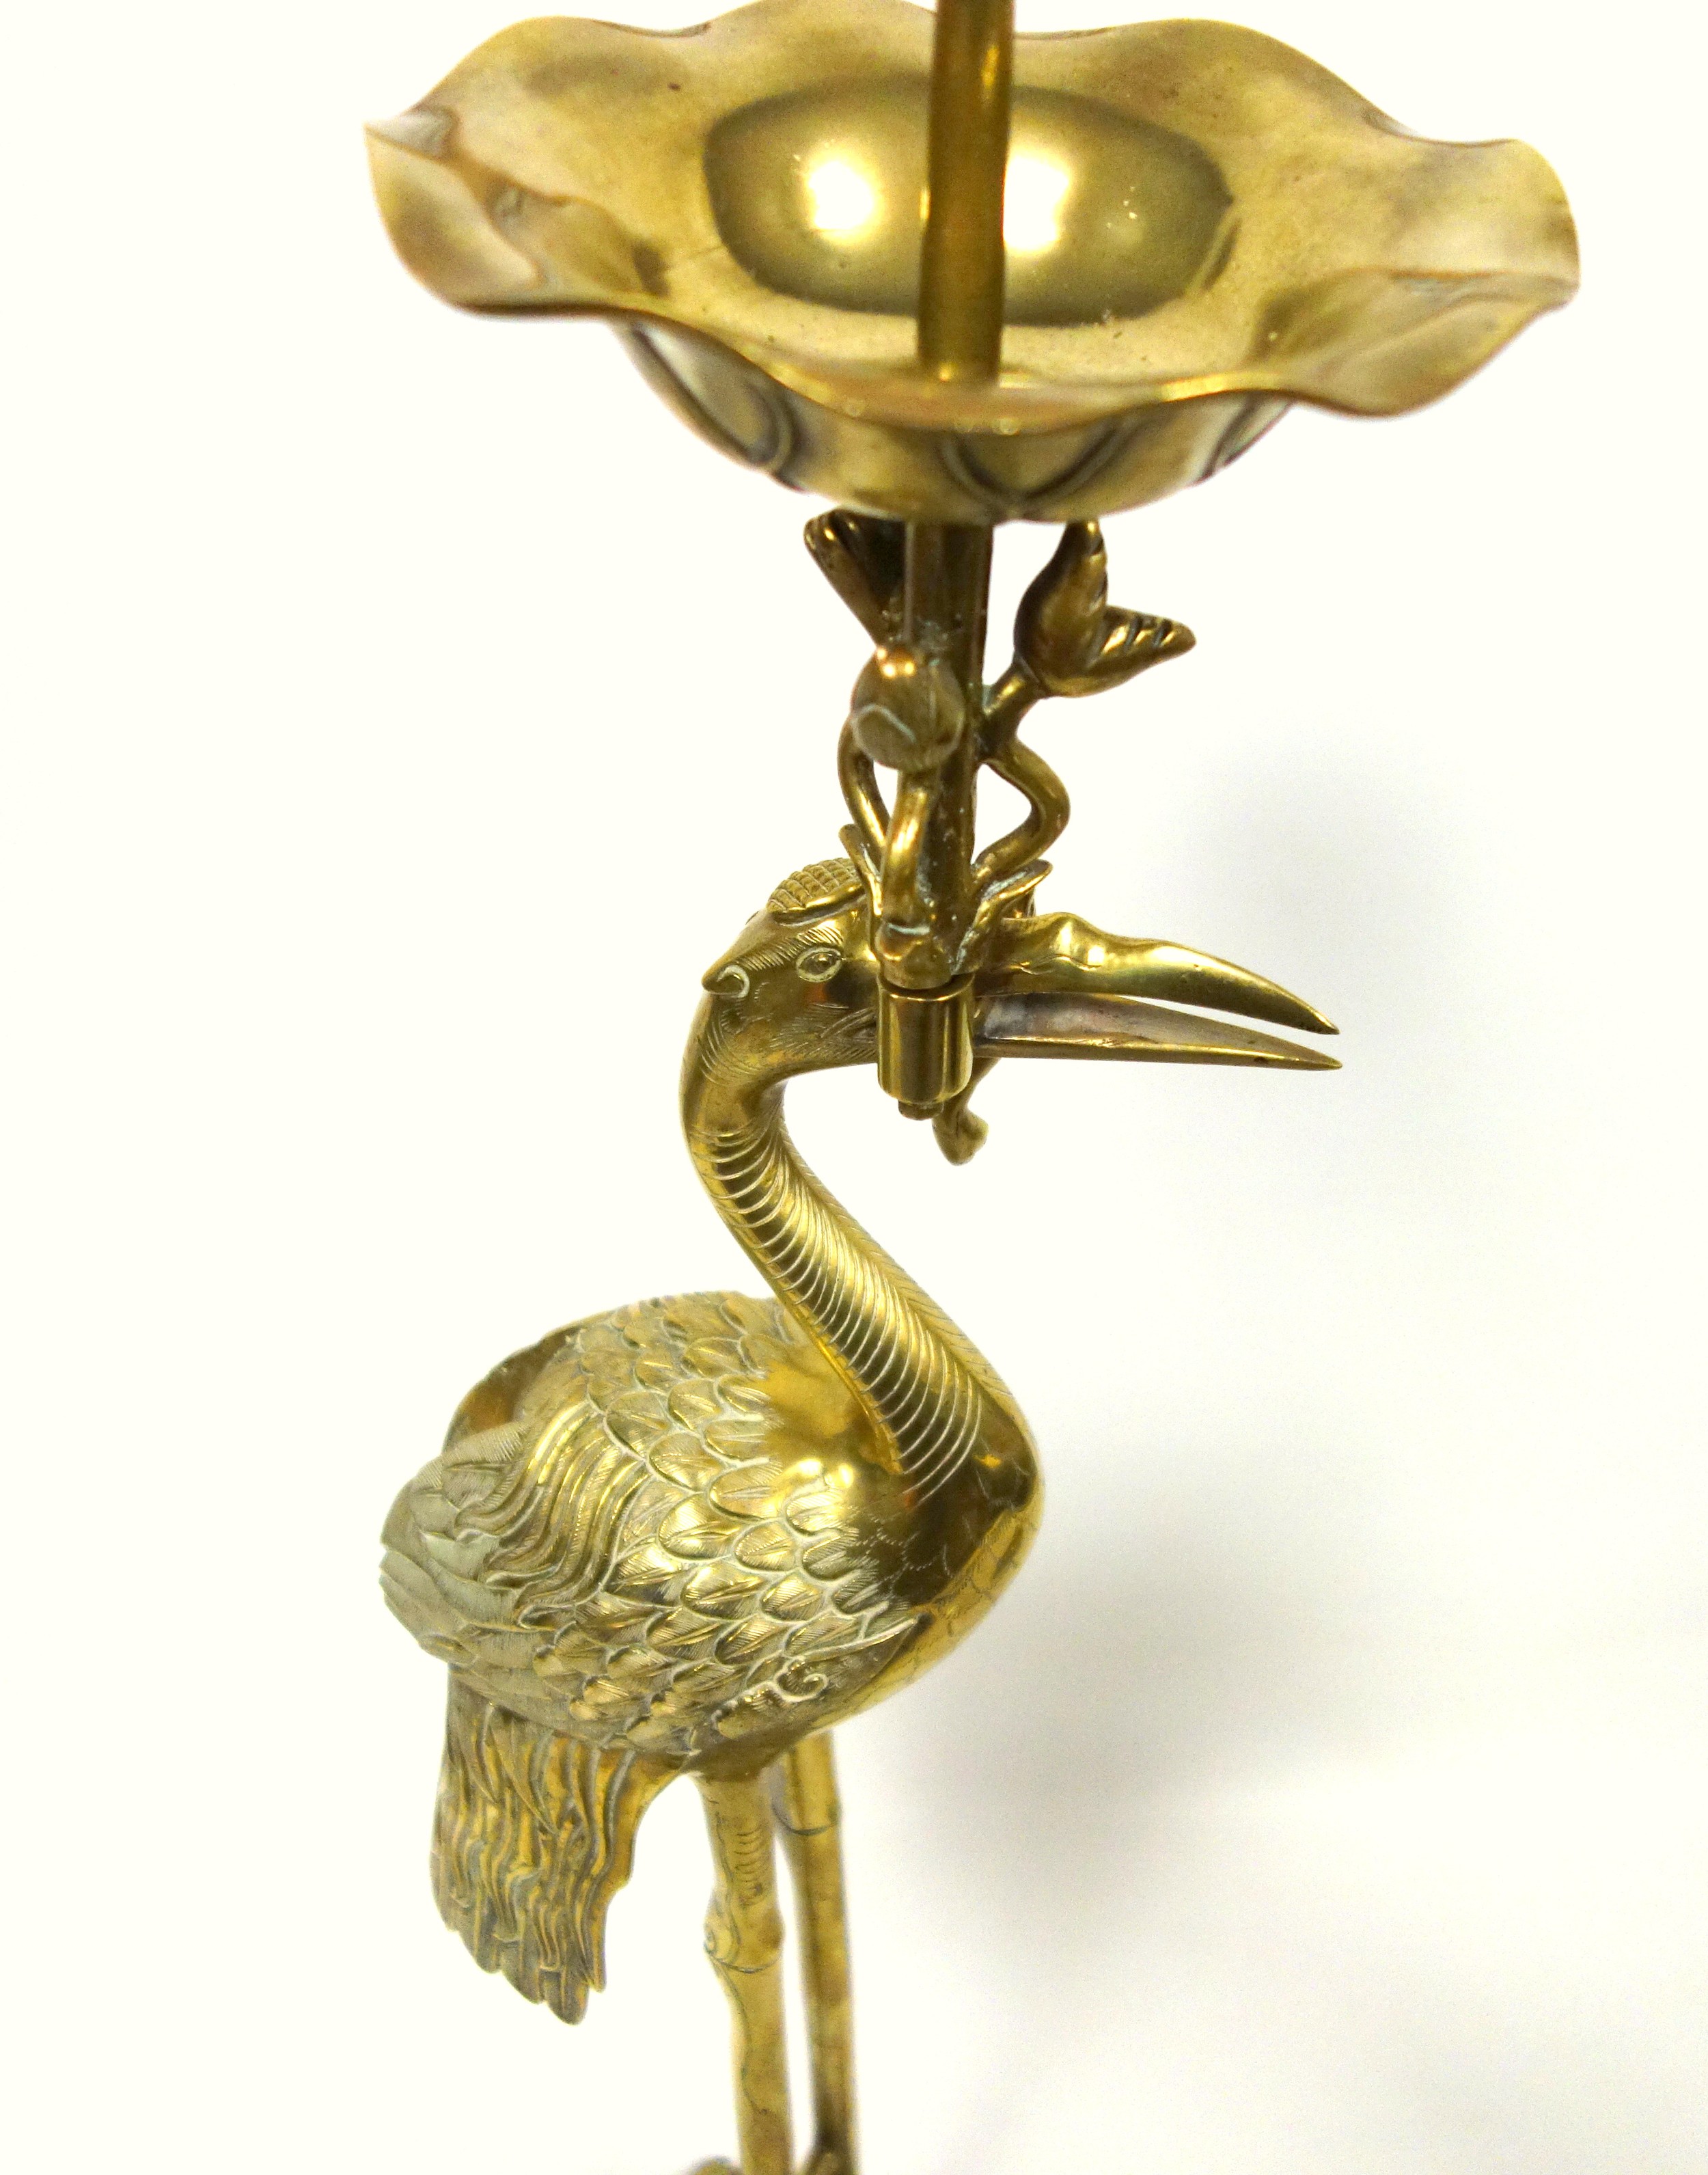 Pair of tall Japanese cranes, each supporting a pricket candle holder and standing on a tortoise, - Image 4 of 5